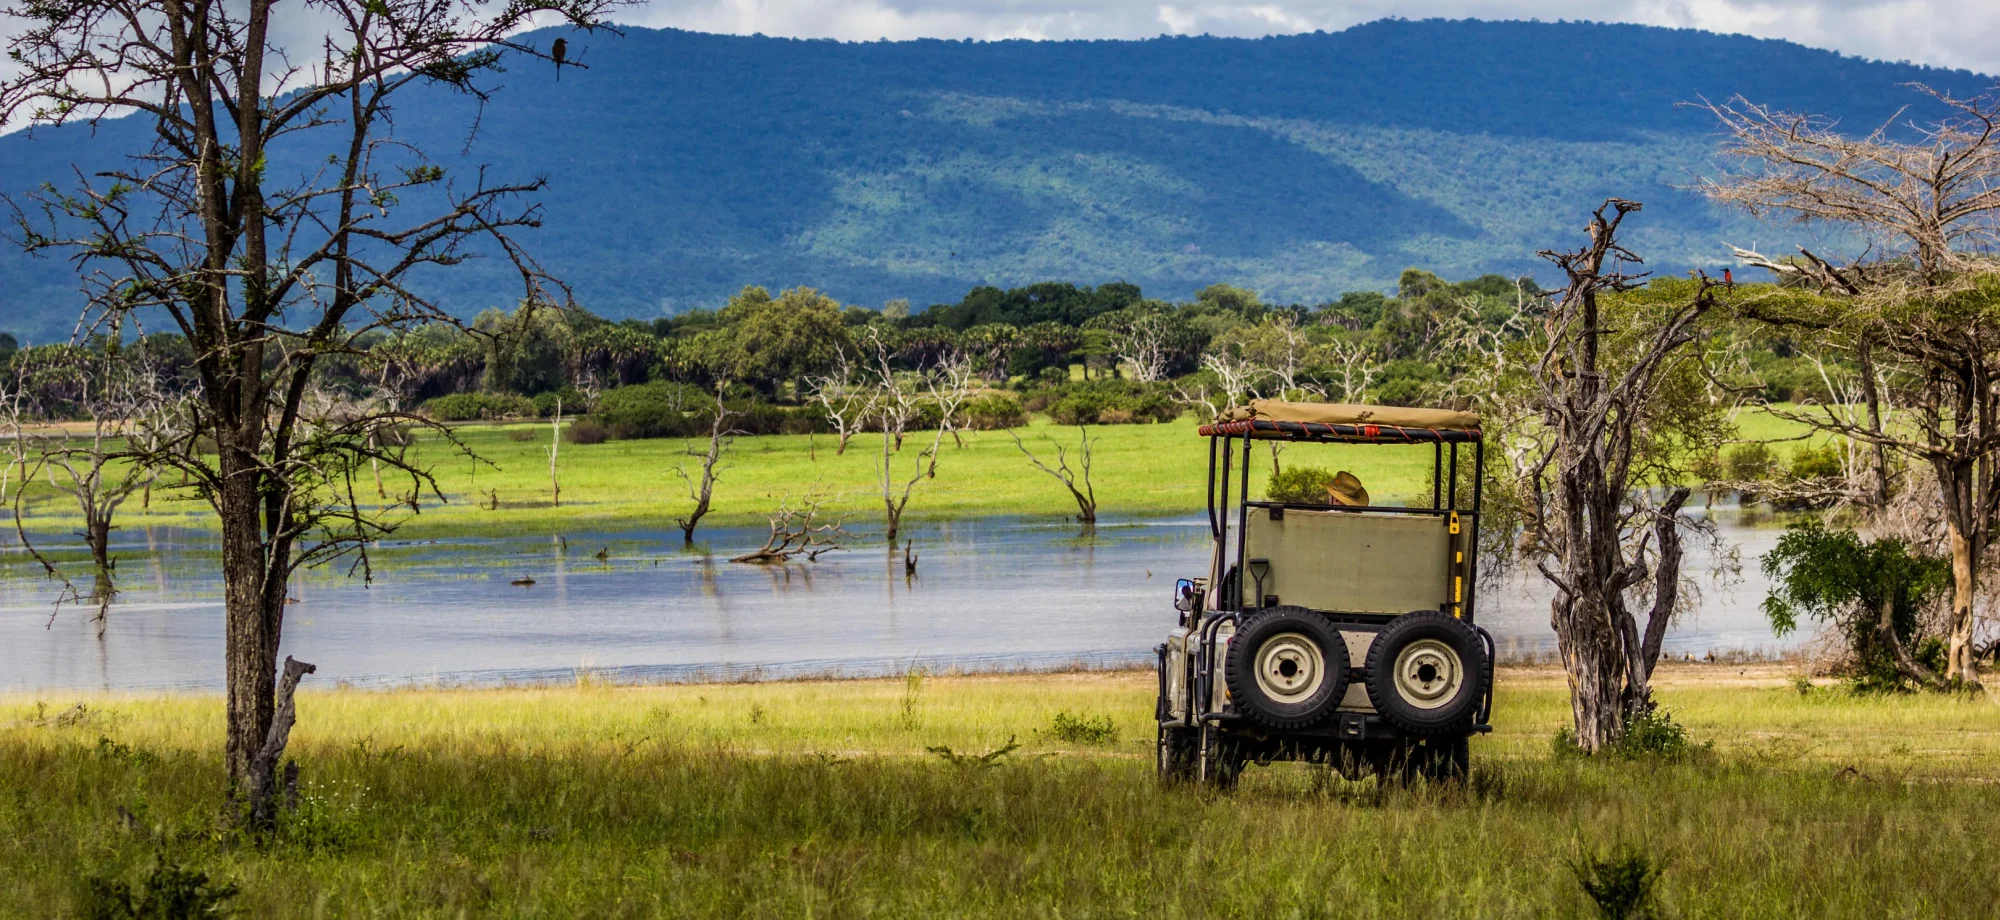 A 4x4 game vehicle is parked up on the banks of the lake at Nyerere National Park, facing the tumbling, grassy mountains behind.